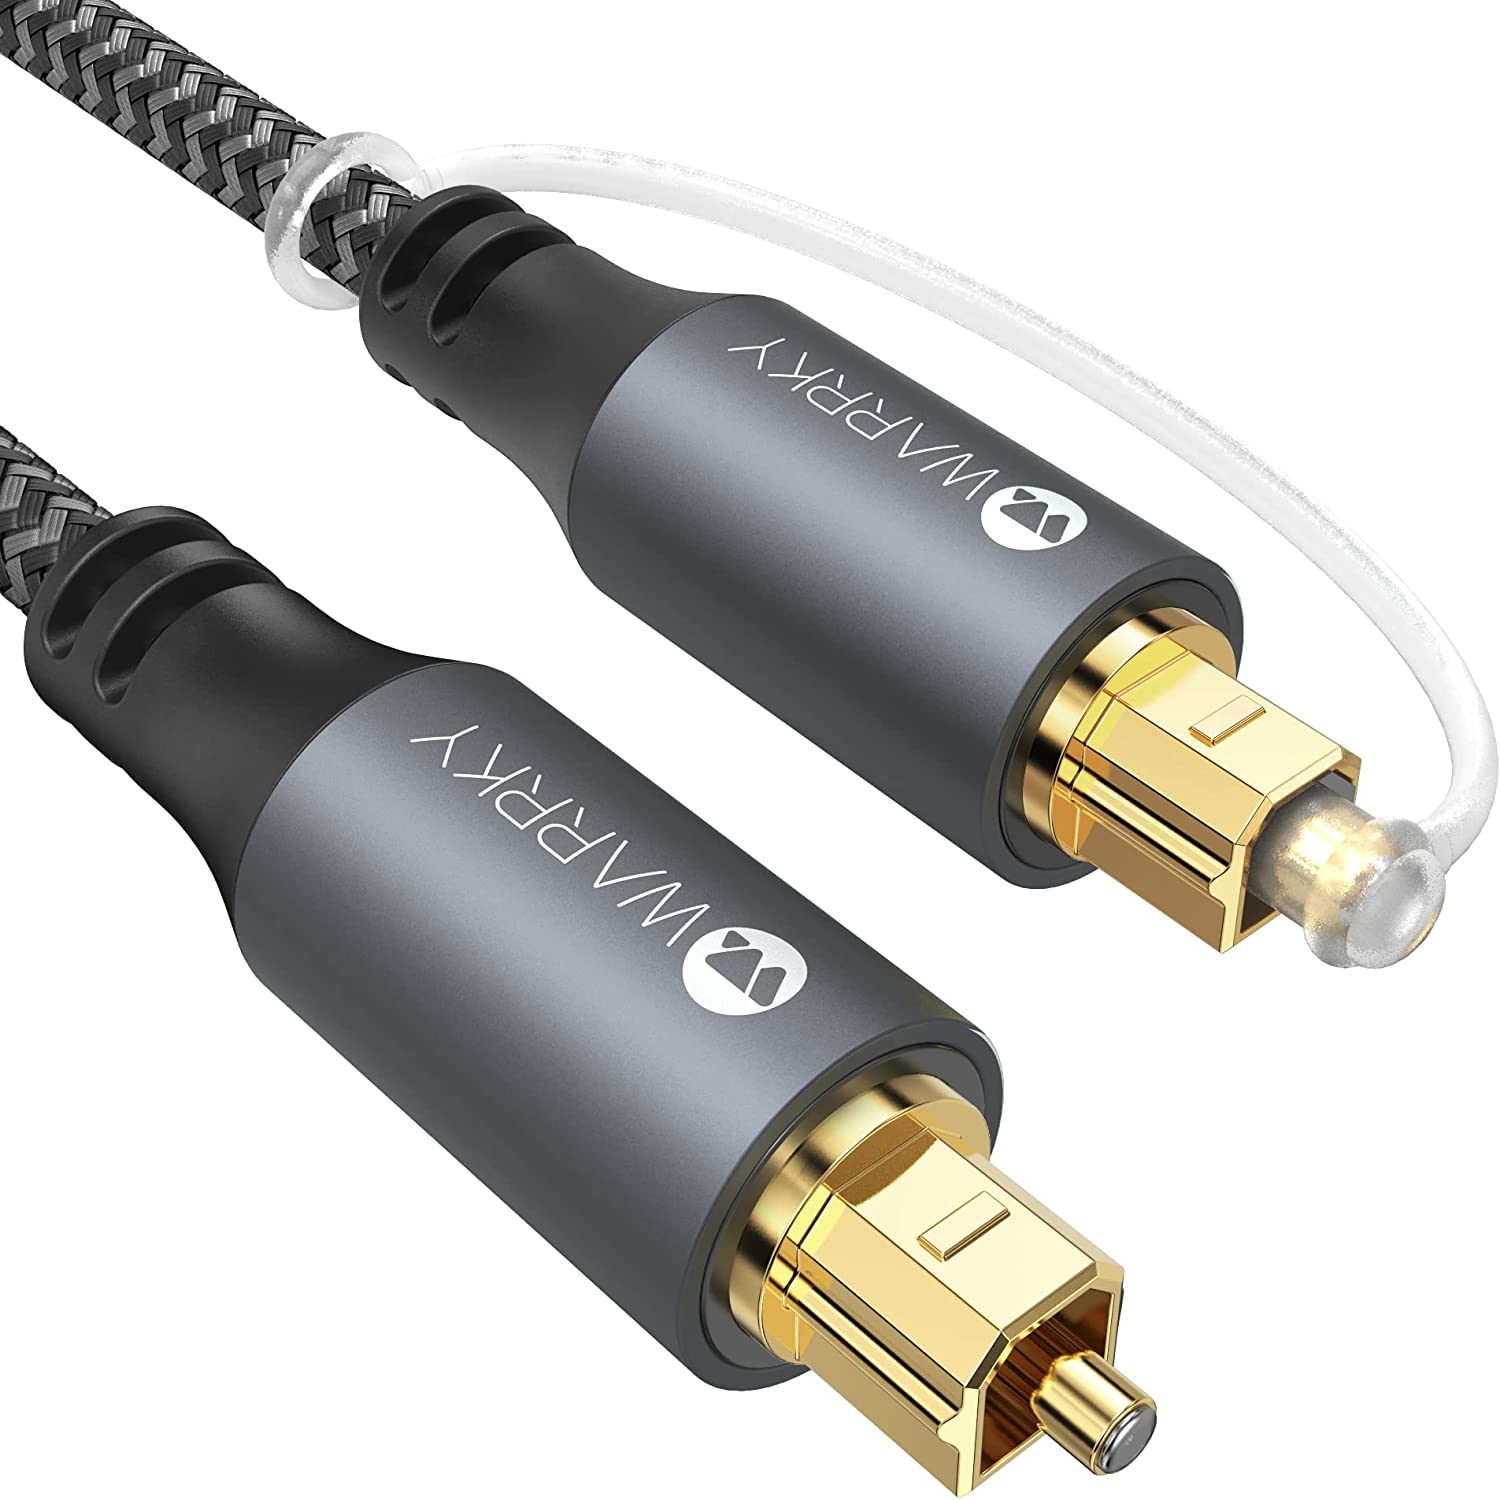 Optical Audio Cable, WARRKY 6ft Optical Cable [...]